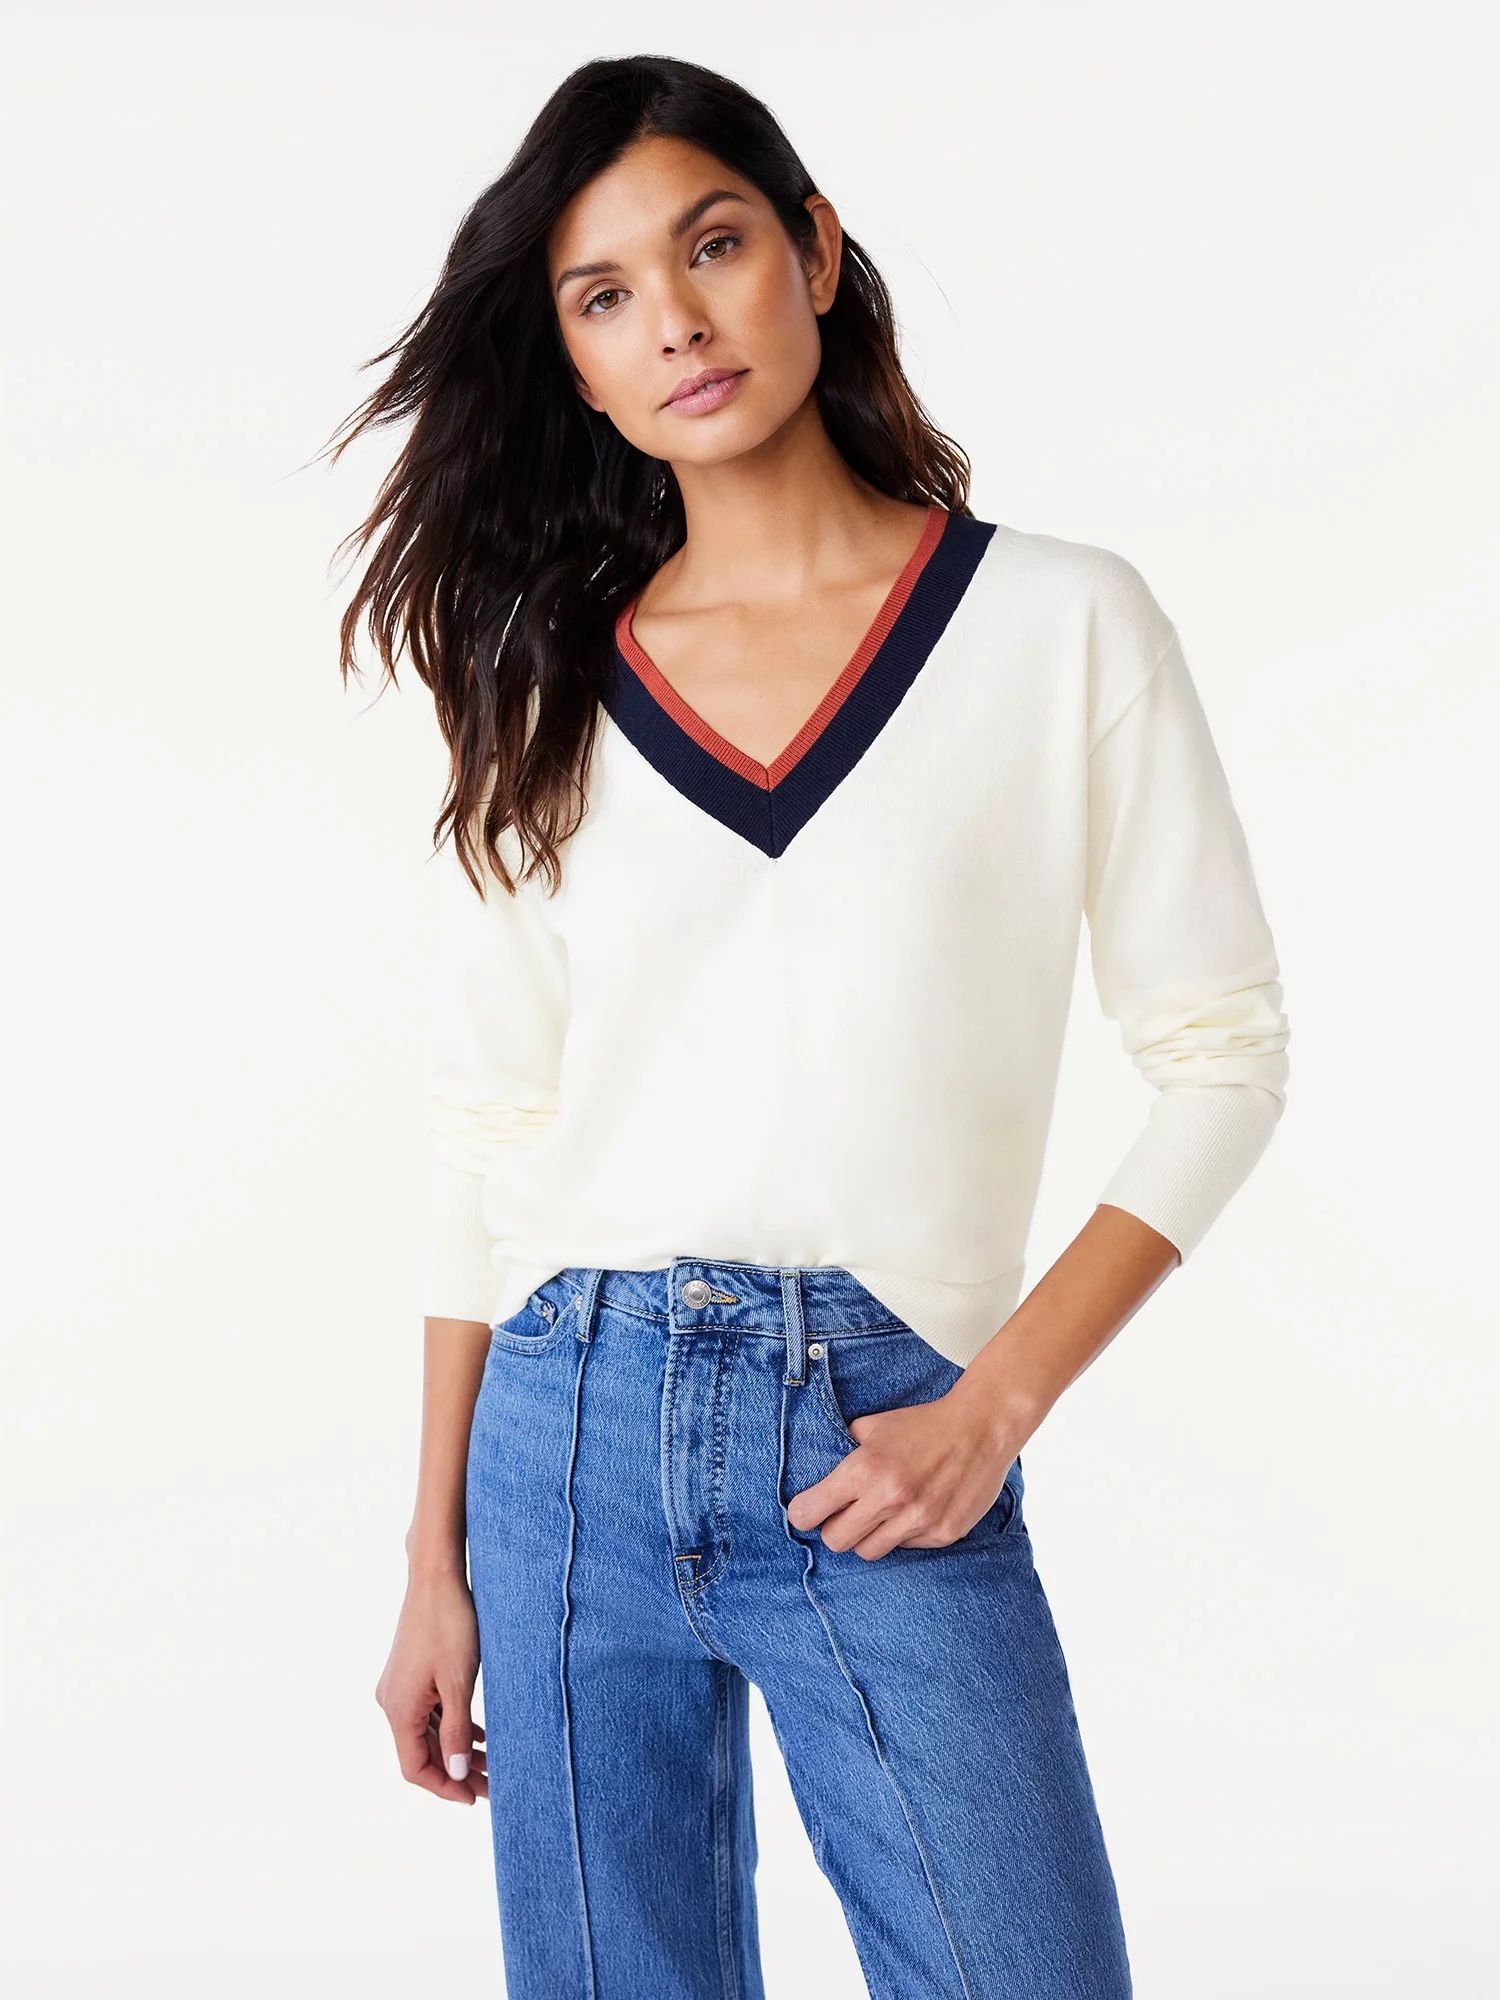 Free Assembly Women’s Contrast V-Neck Sweater with Long Sleeves, Midweight, Sizes XS-XXL | Walmart (US)